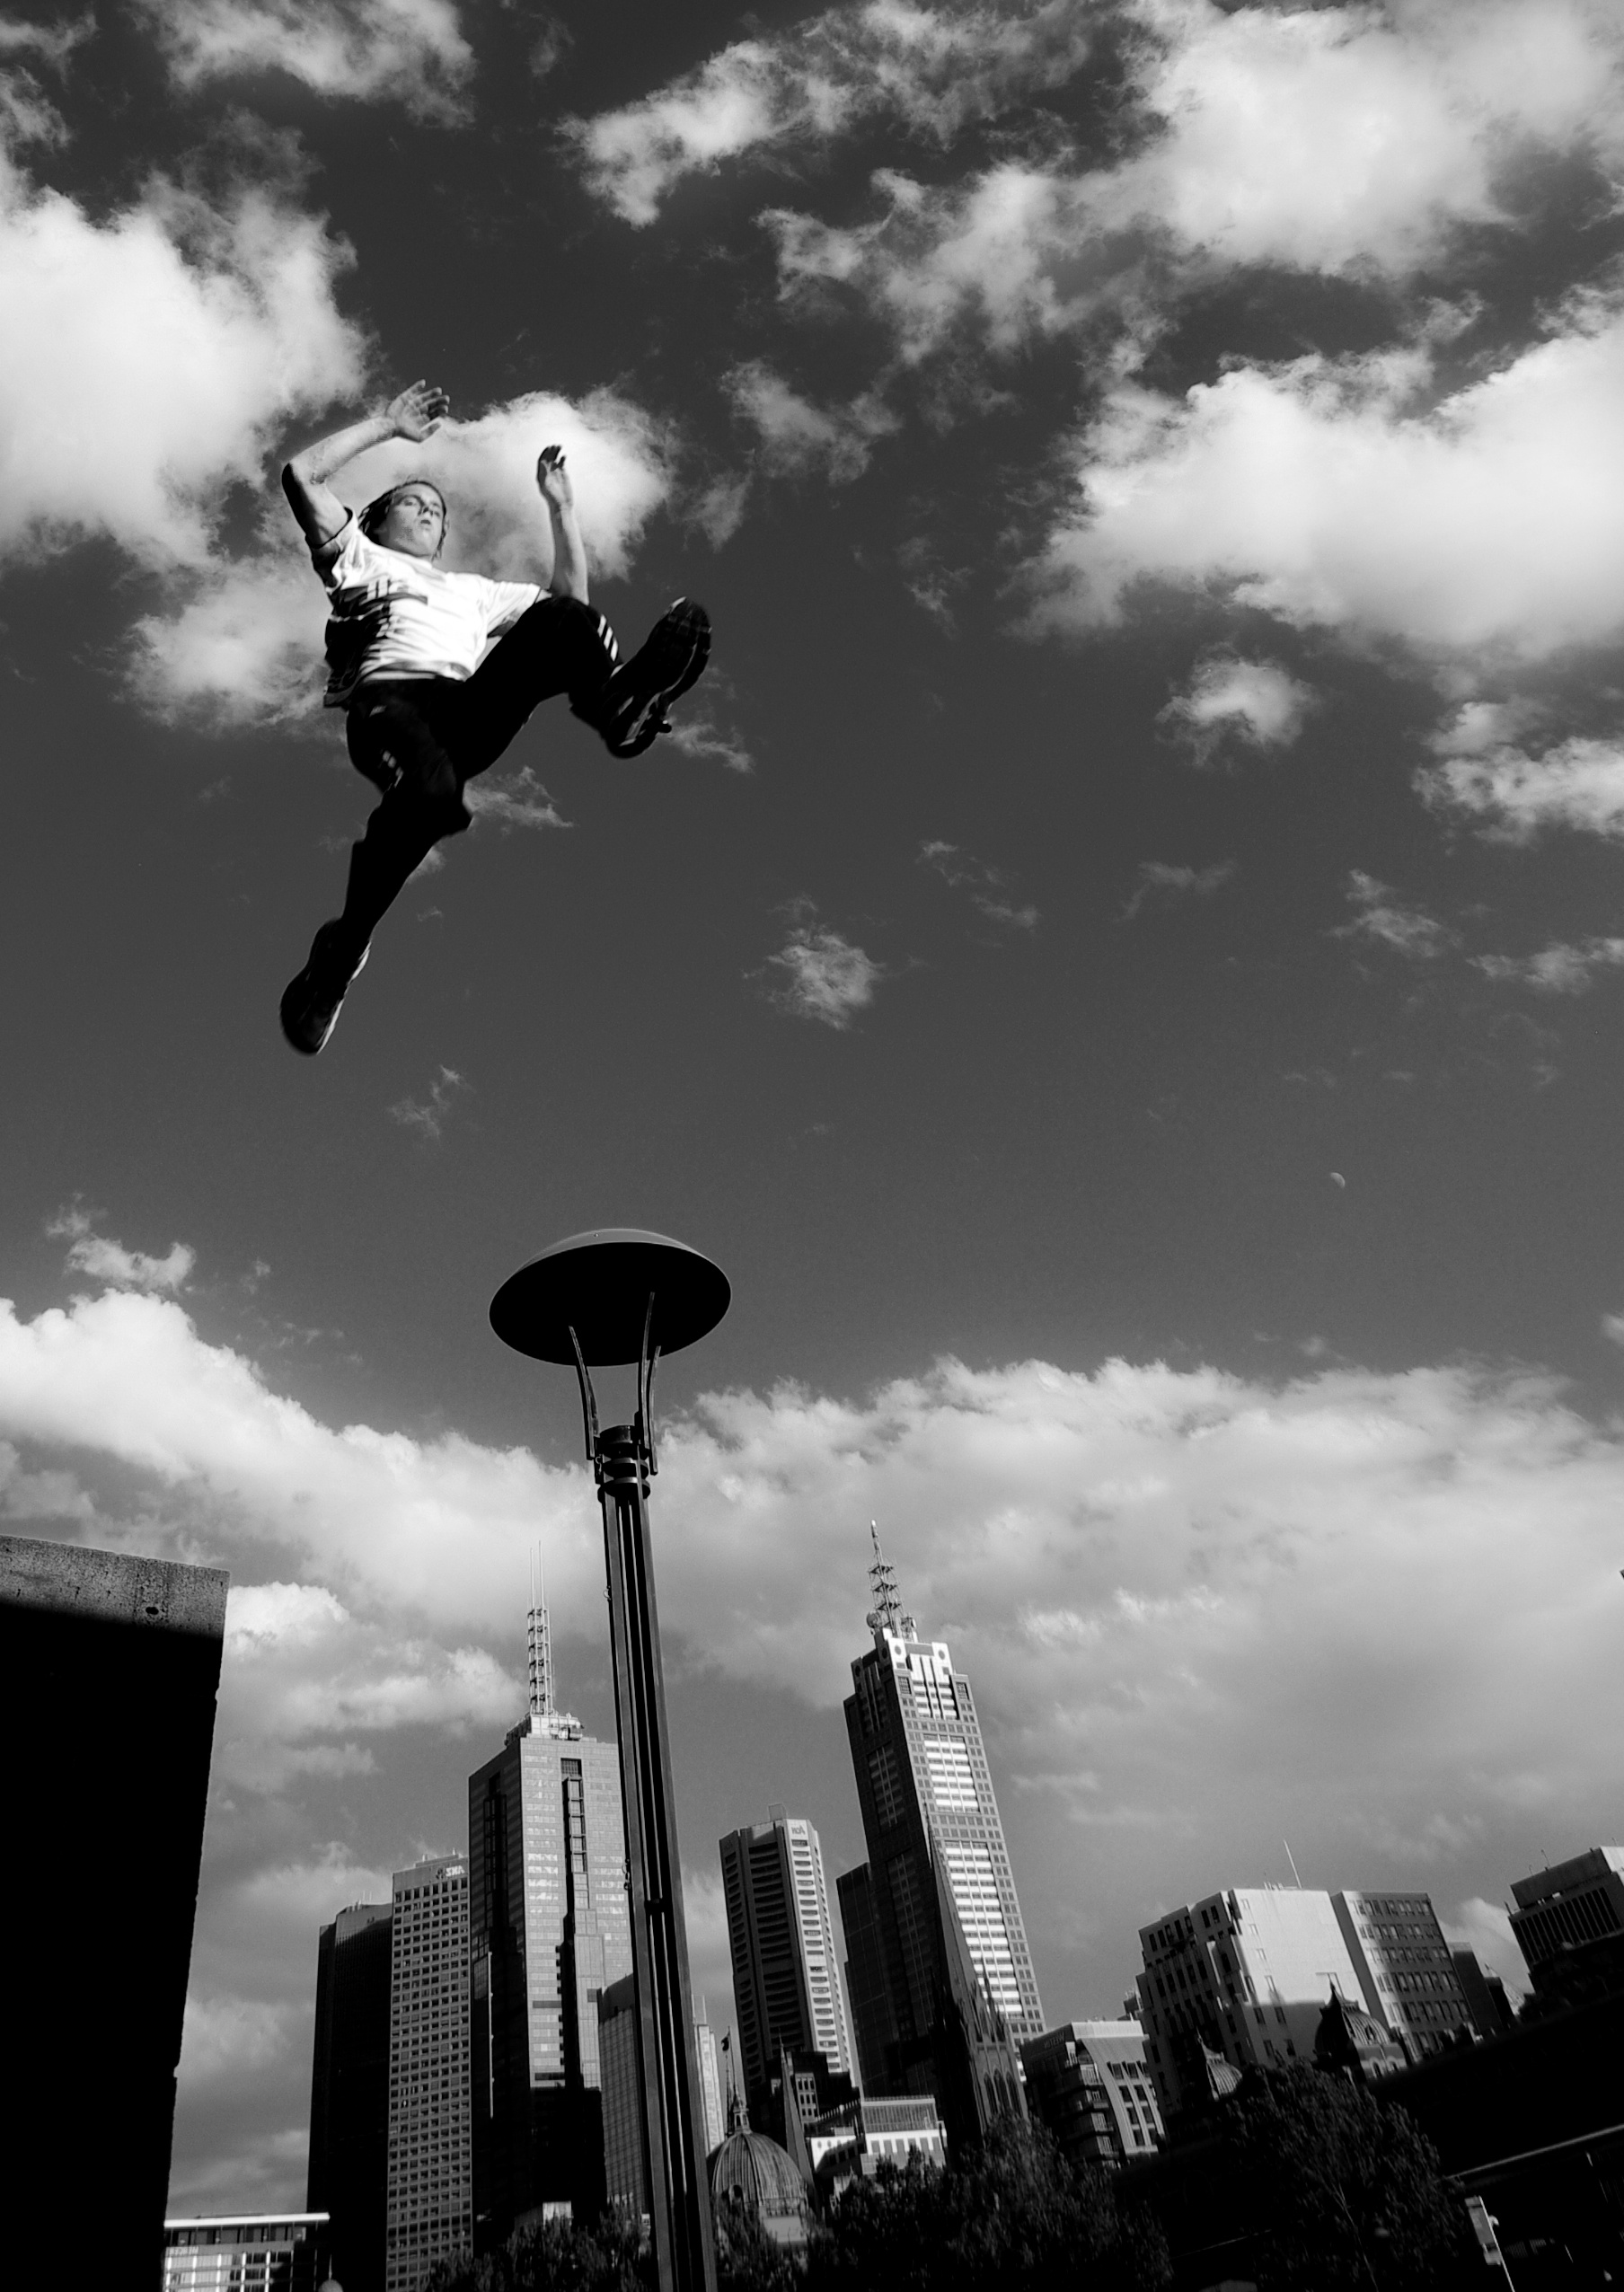 Parkour: Monochrome parkour practitioner, Freedom of movement in the city, Precision jump. 1810x2560 HD Wallpaper.